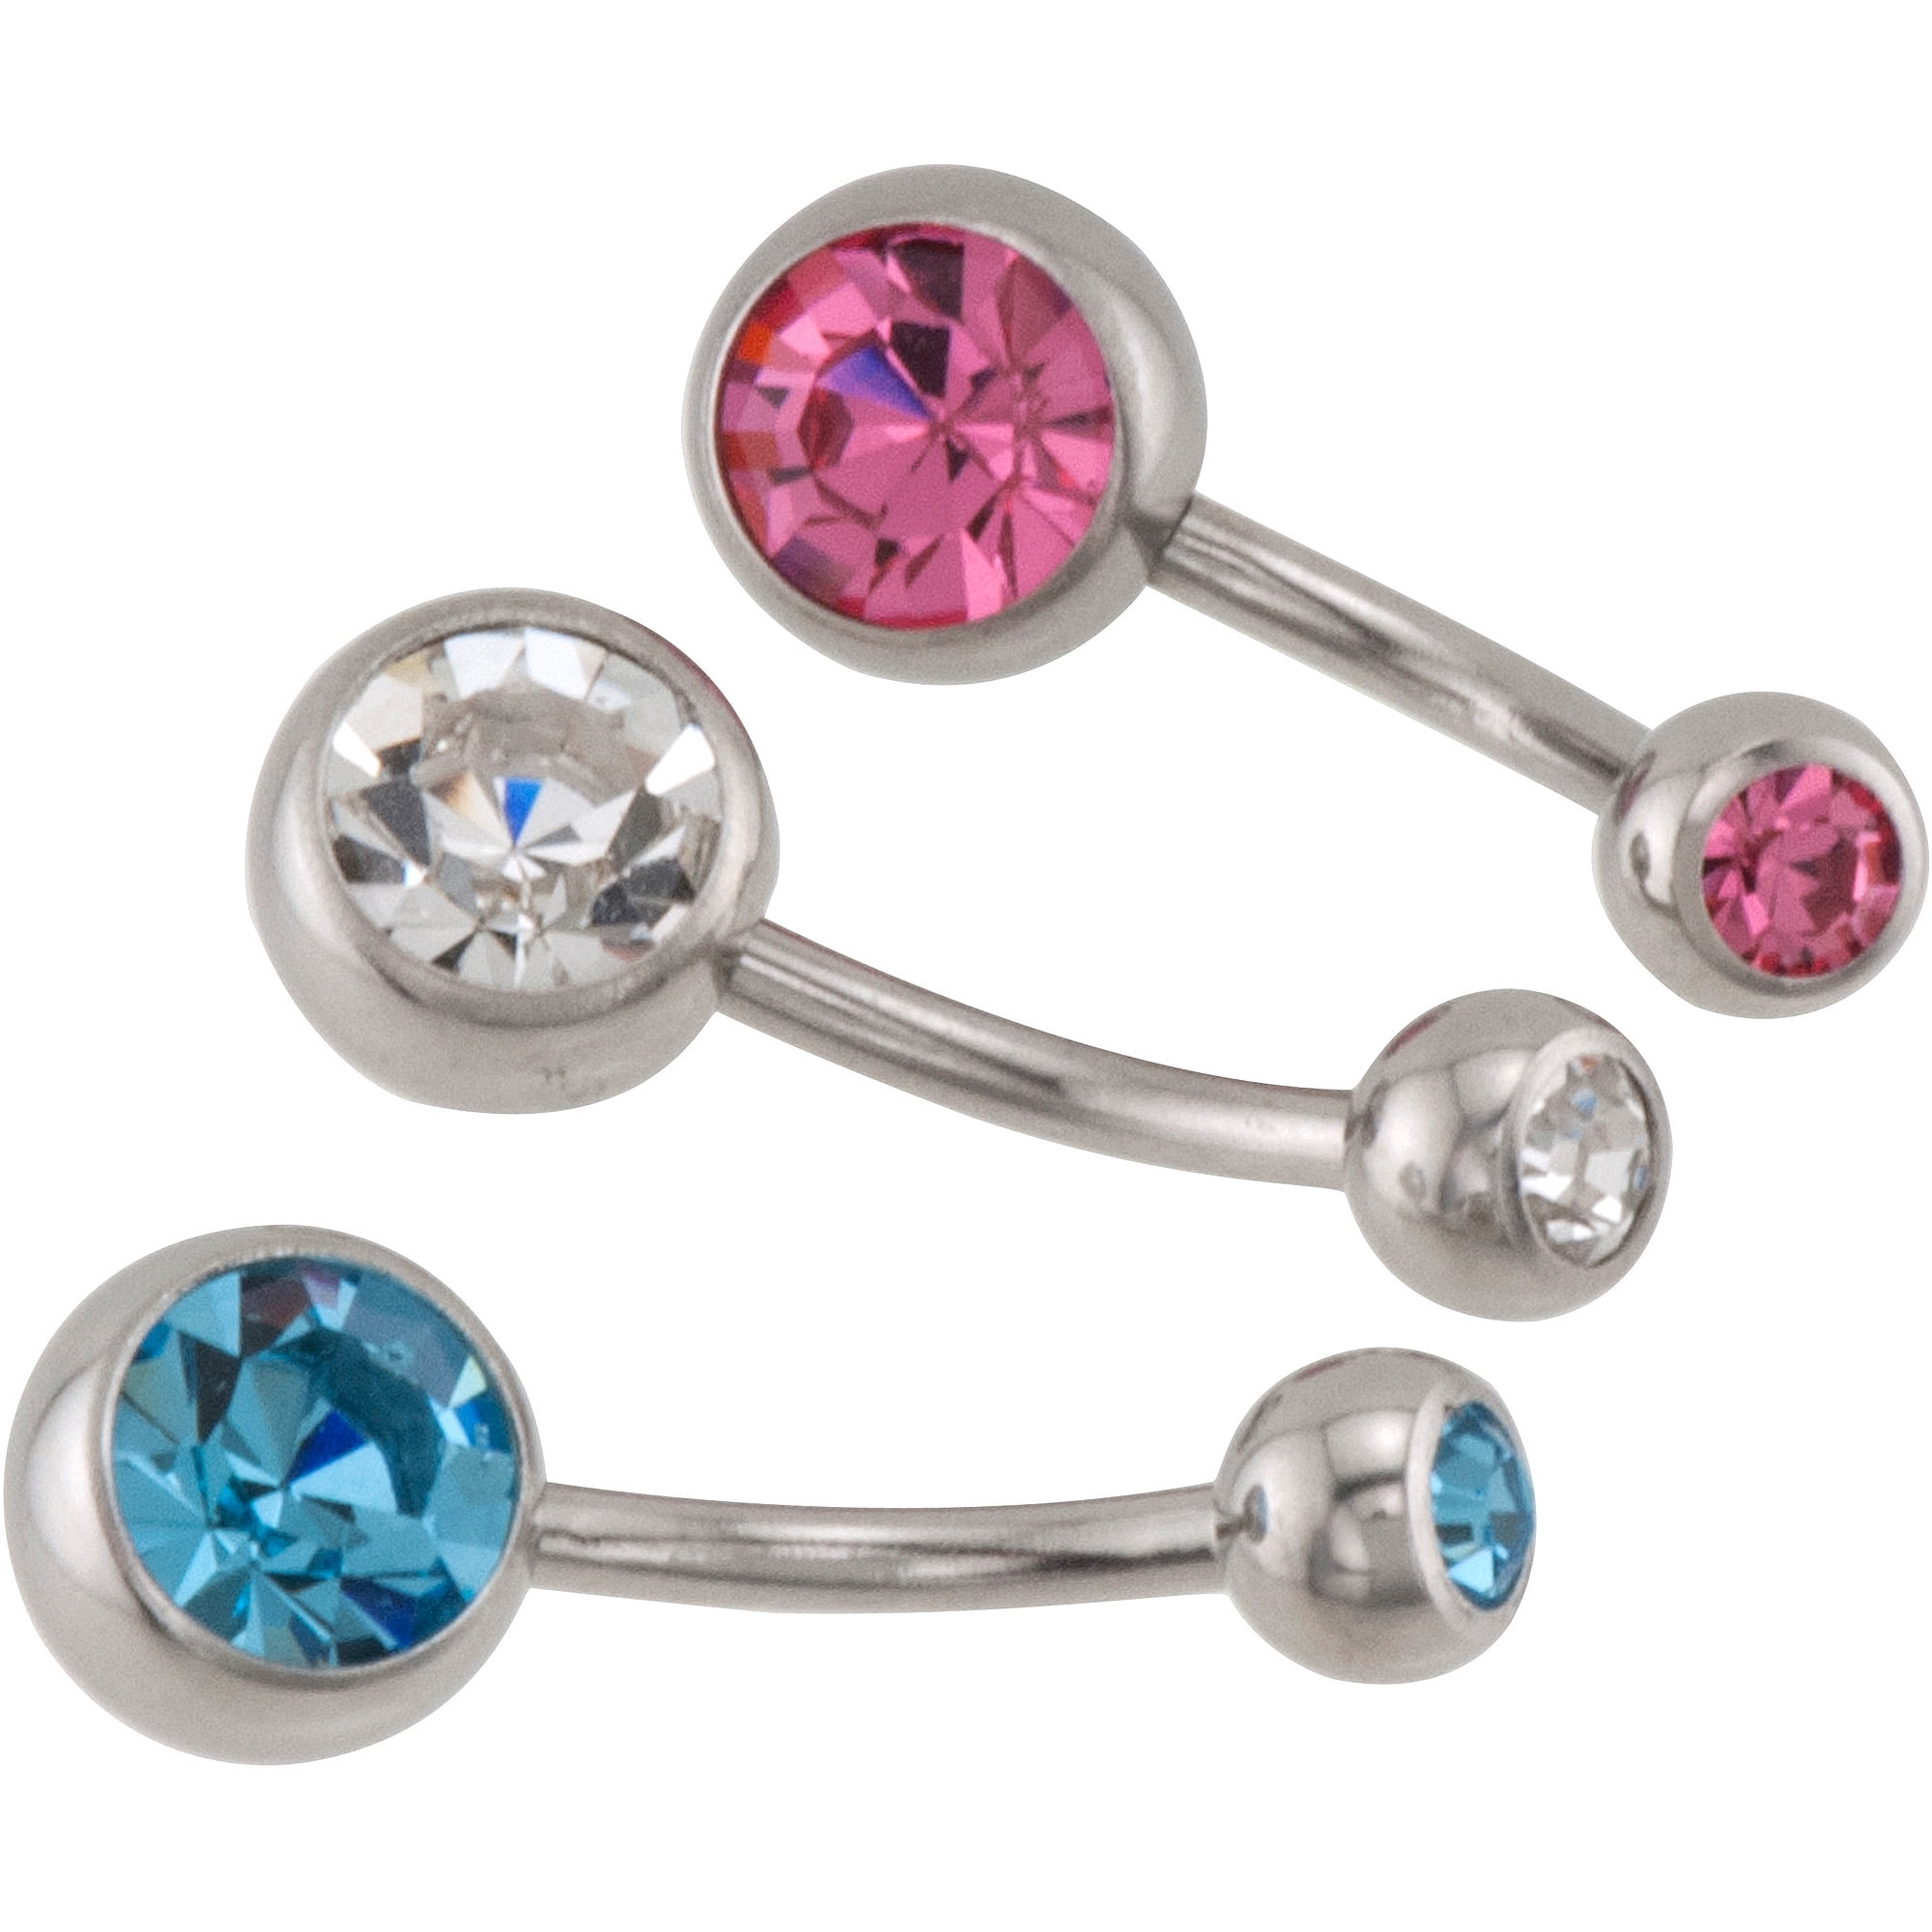 browser Recite deres Body Jewelry 14G Crystal Belly Rings, 3 Pack - Walmart.com